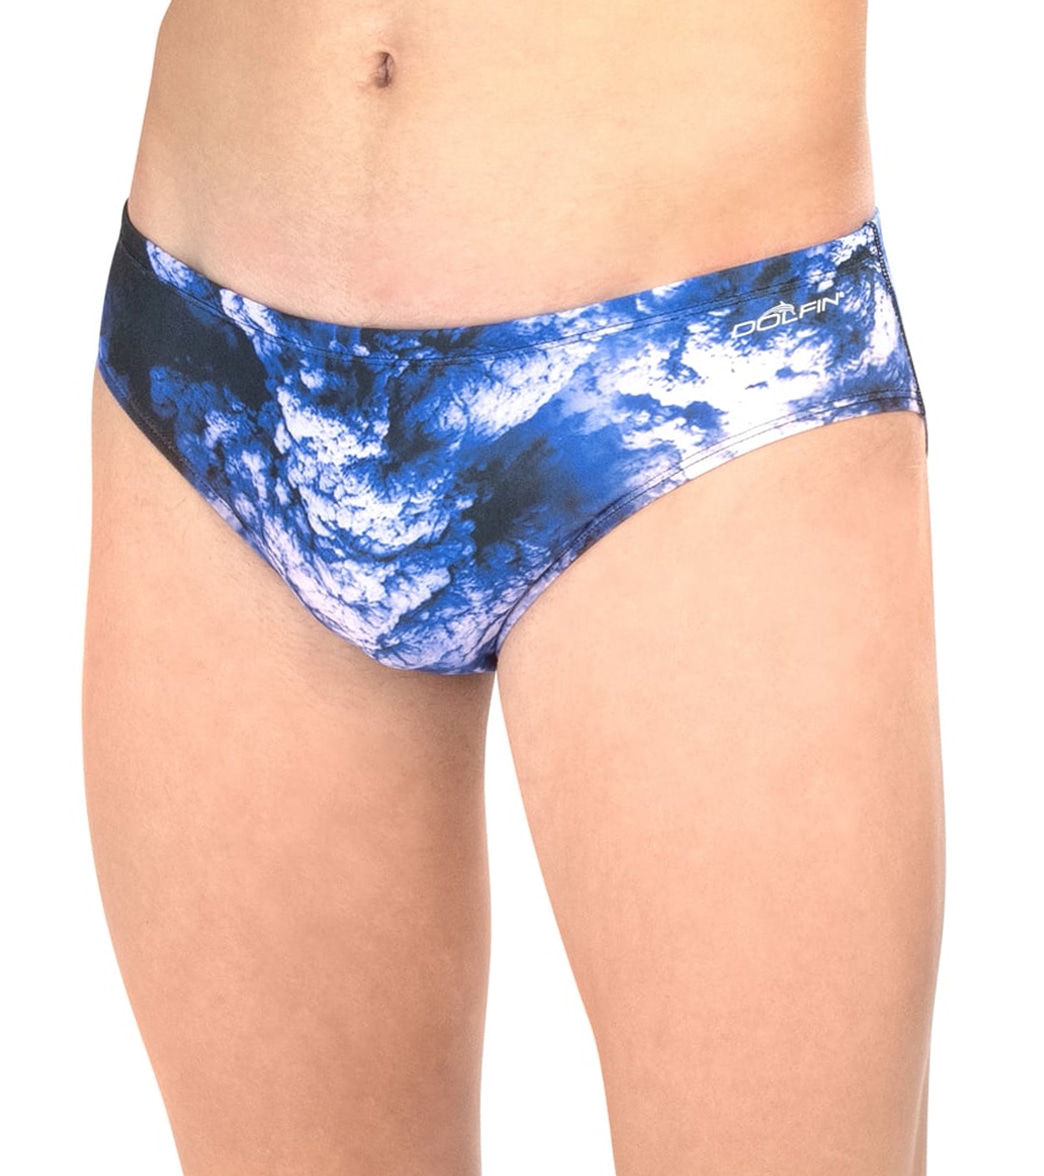 Dolfin Men's Reliance Cyclone Racer Brief Swimsuit - Blue 26 Polyester - Swimoutlet.com